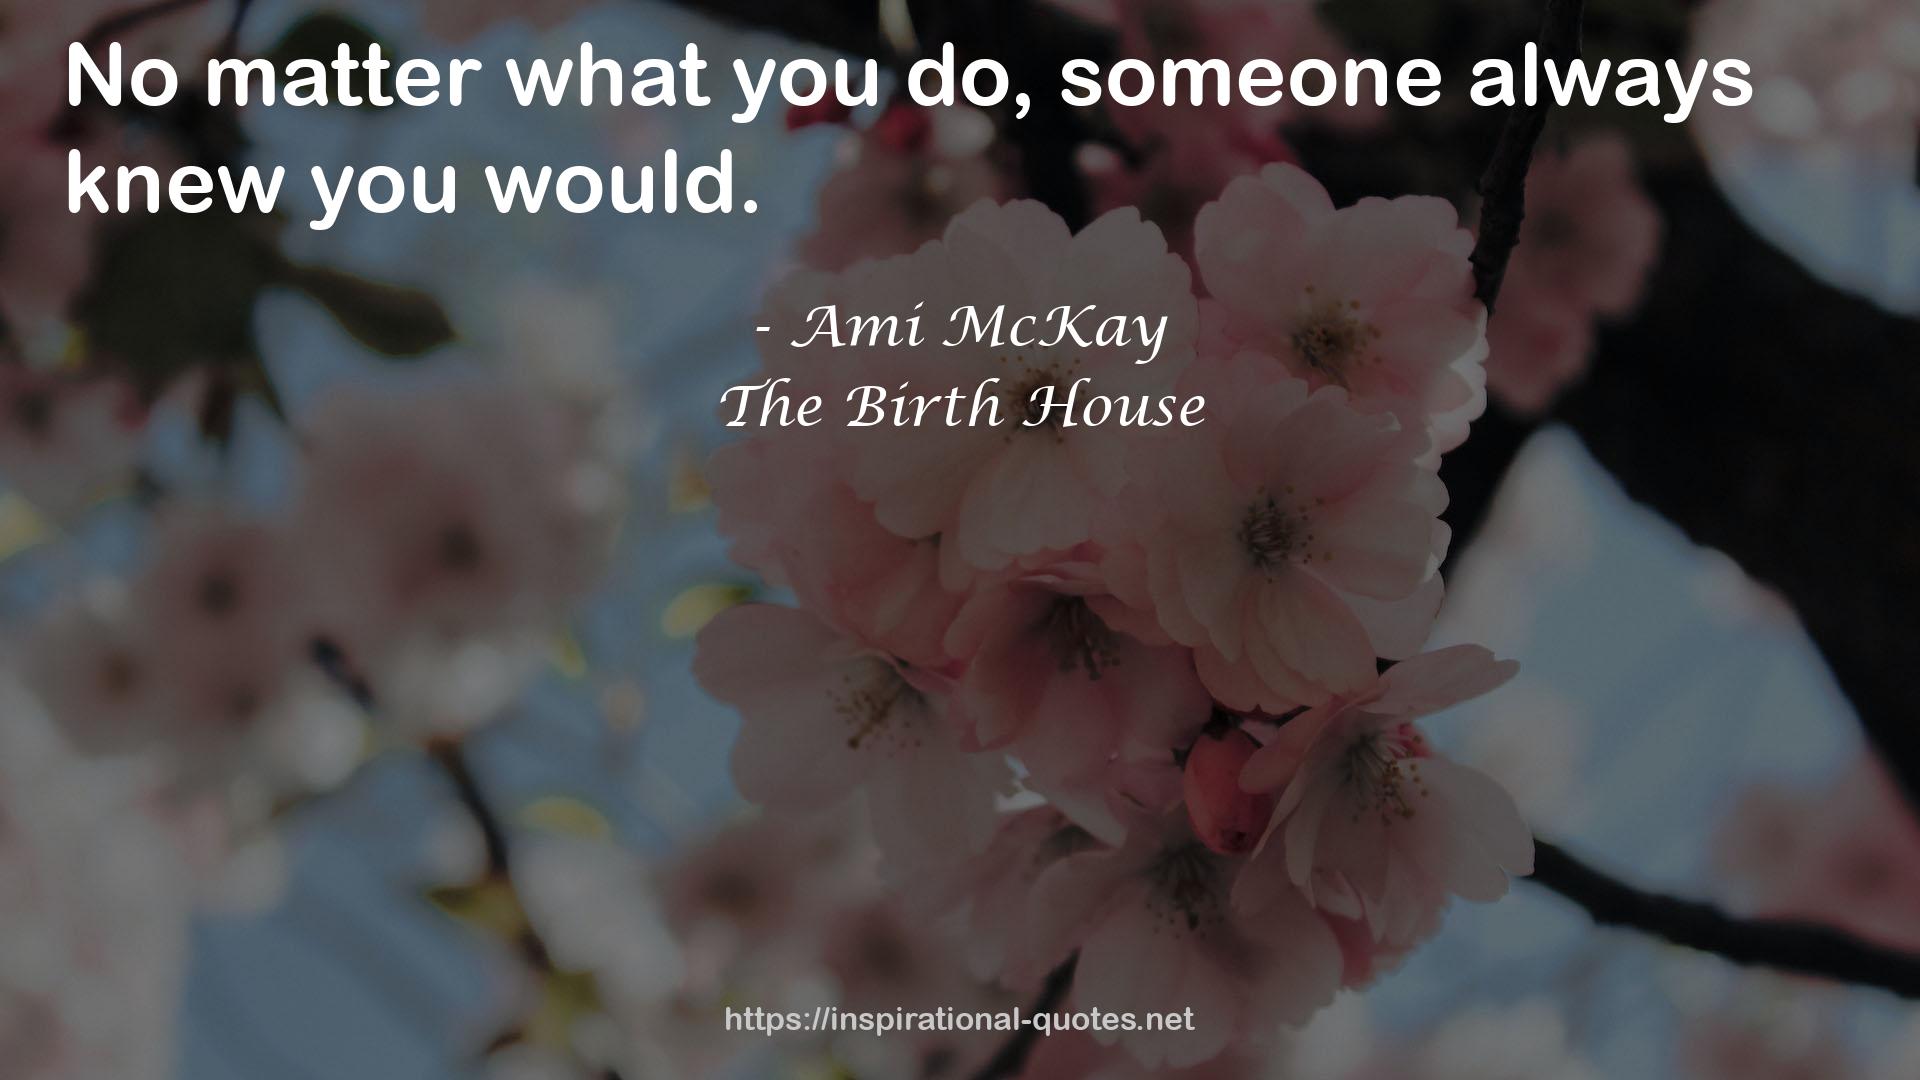 The Birth House QUOTES